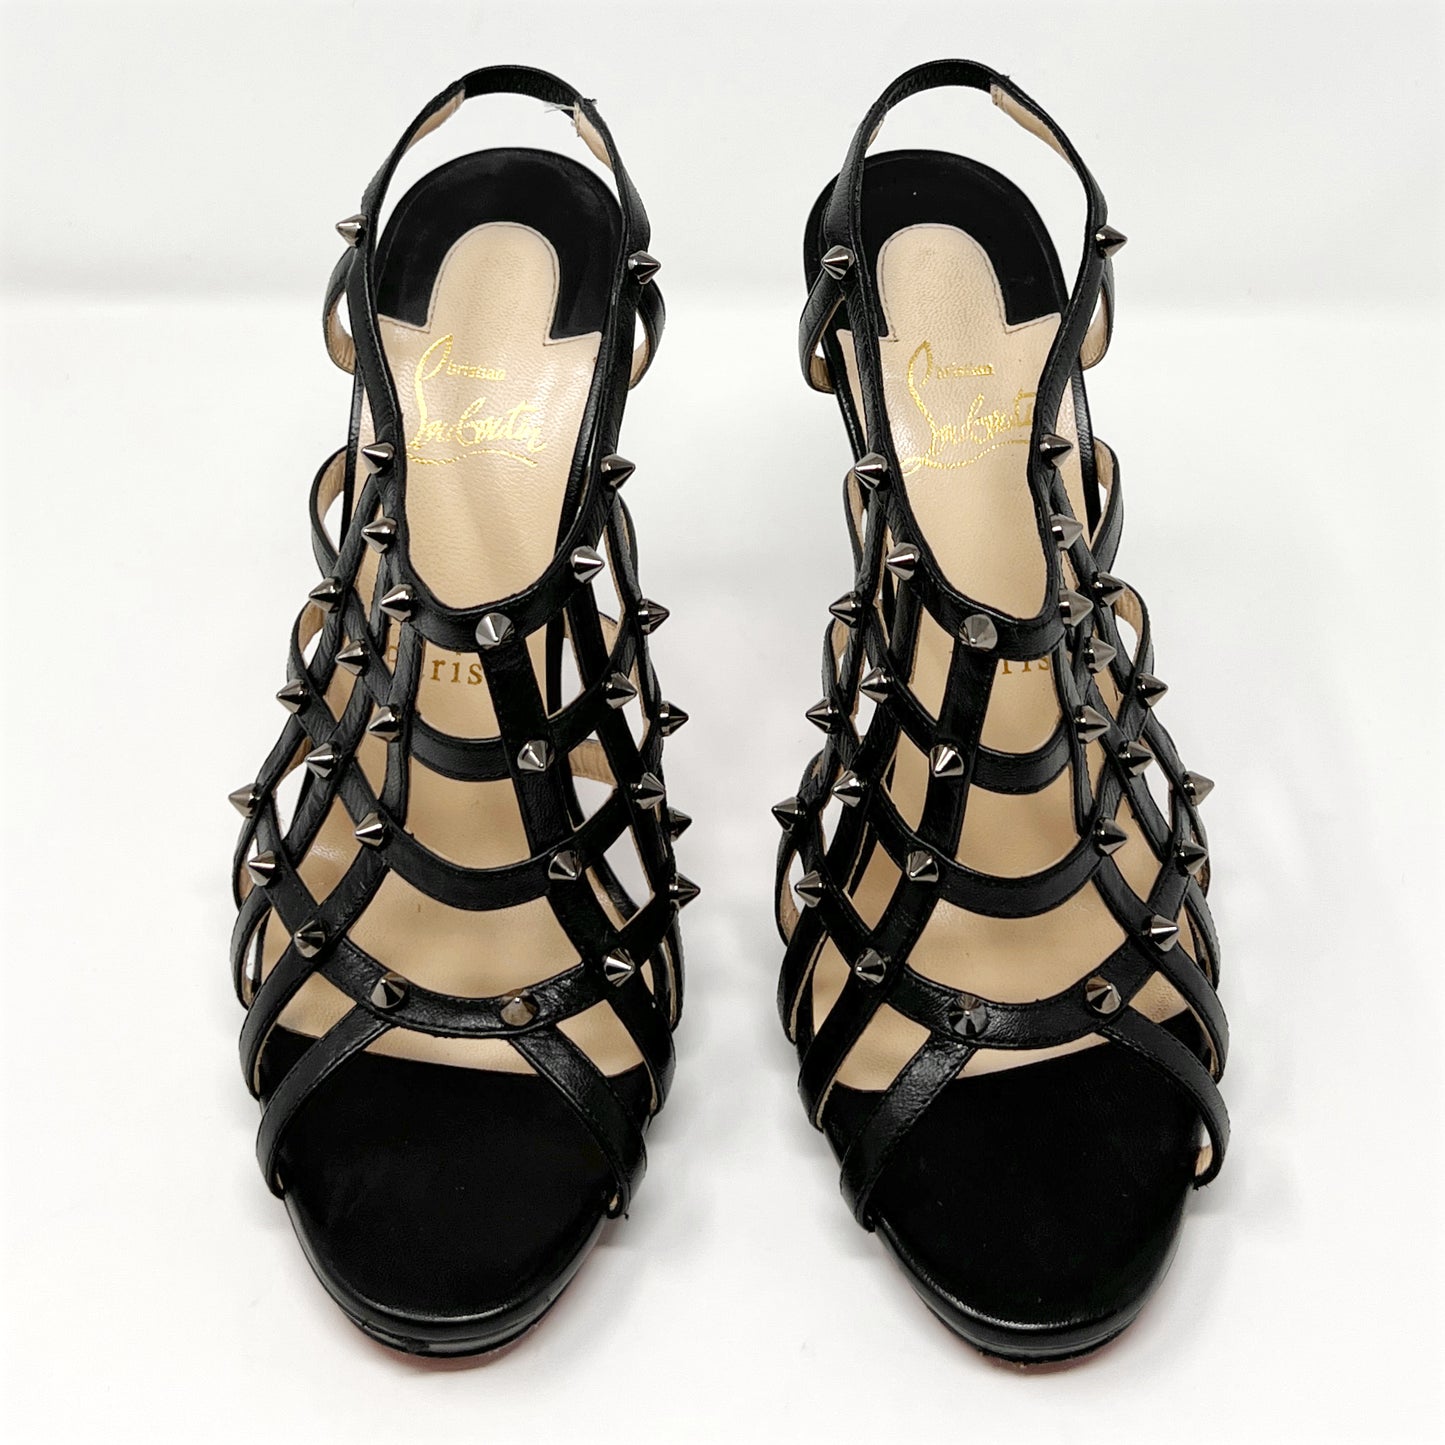 Christian Louboutin Guinievre Black Leather Strap Caged Studded Heels Sandals Size EU 38